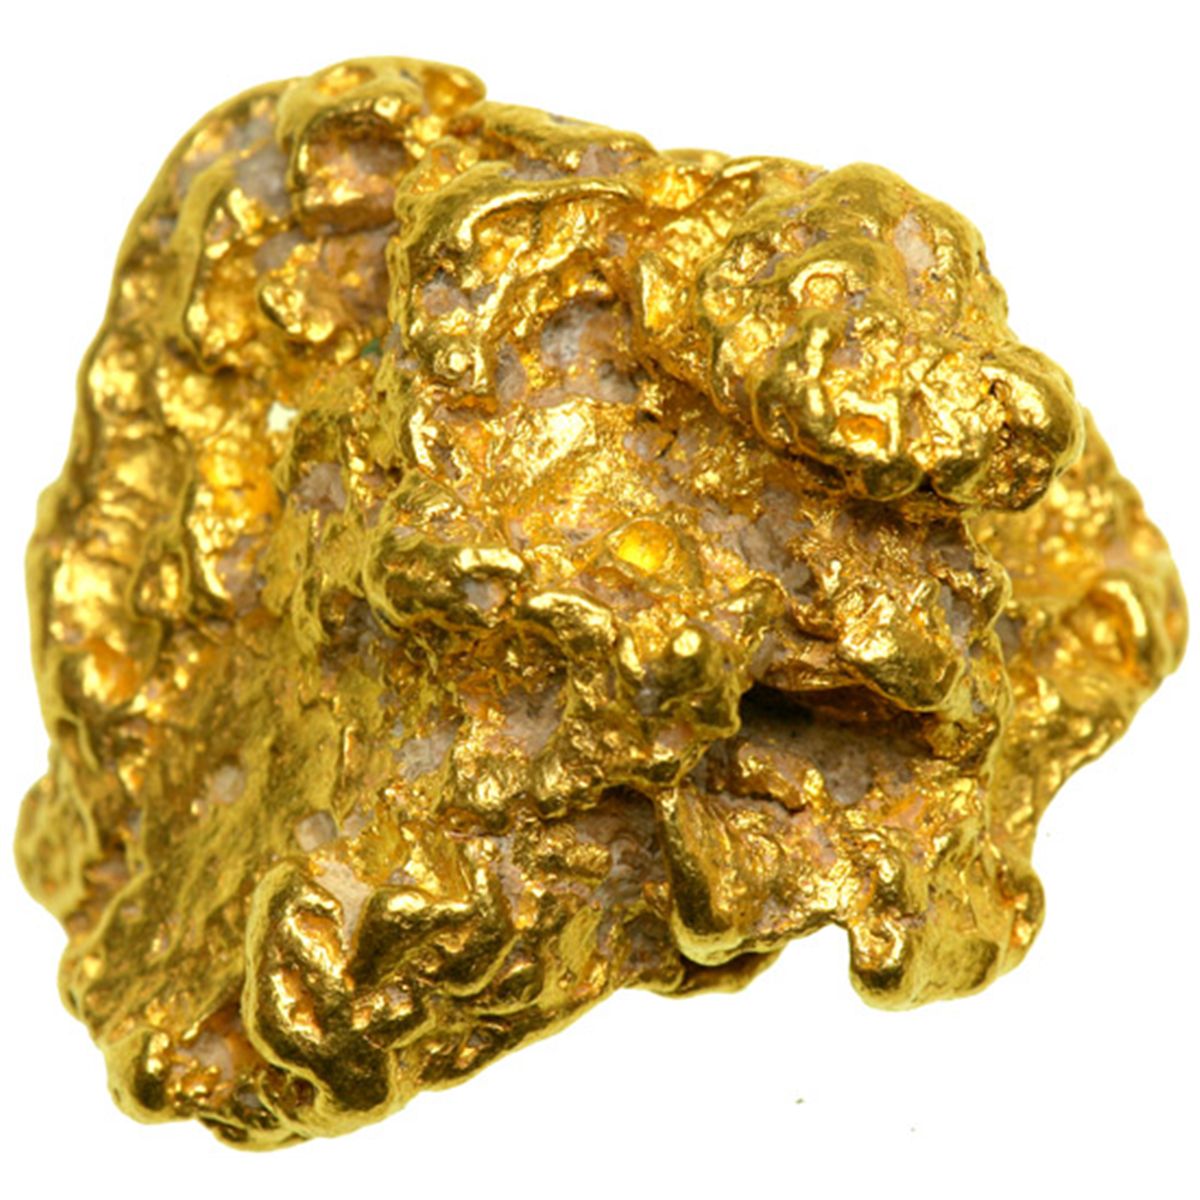 Gold Nugget Large Gold Nugget 37 9 Gm